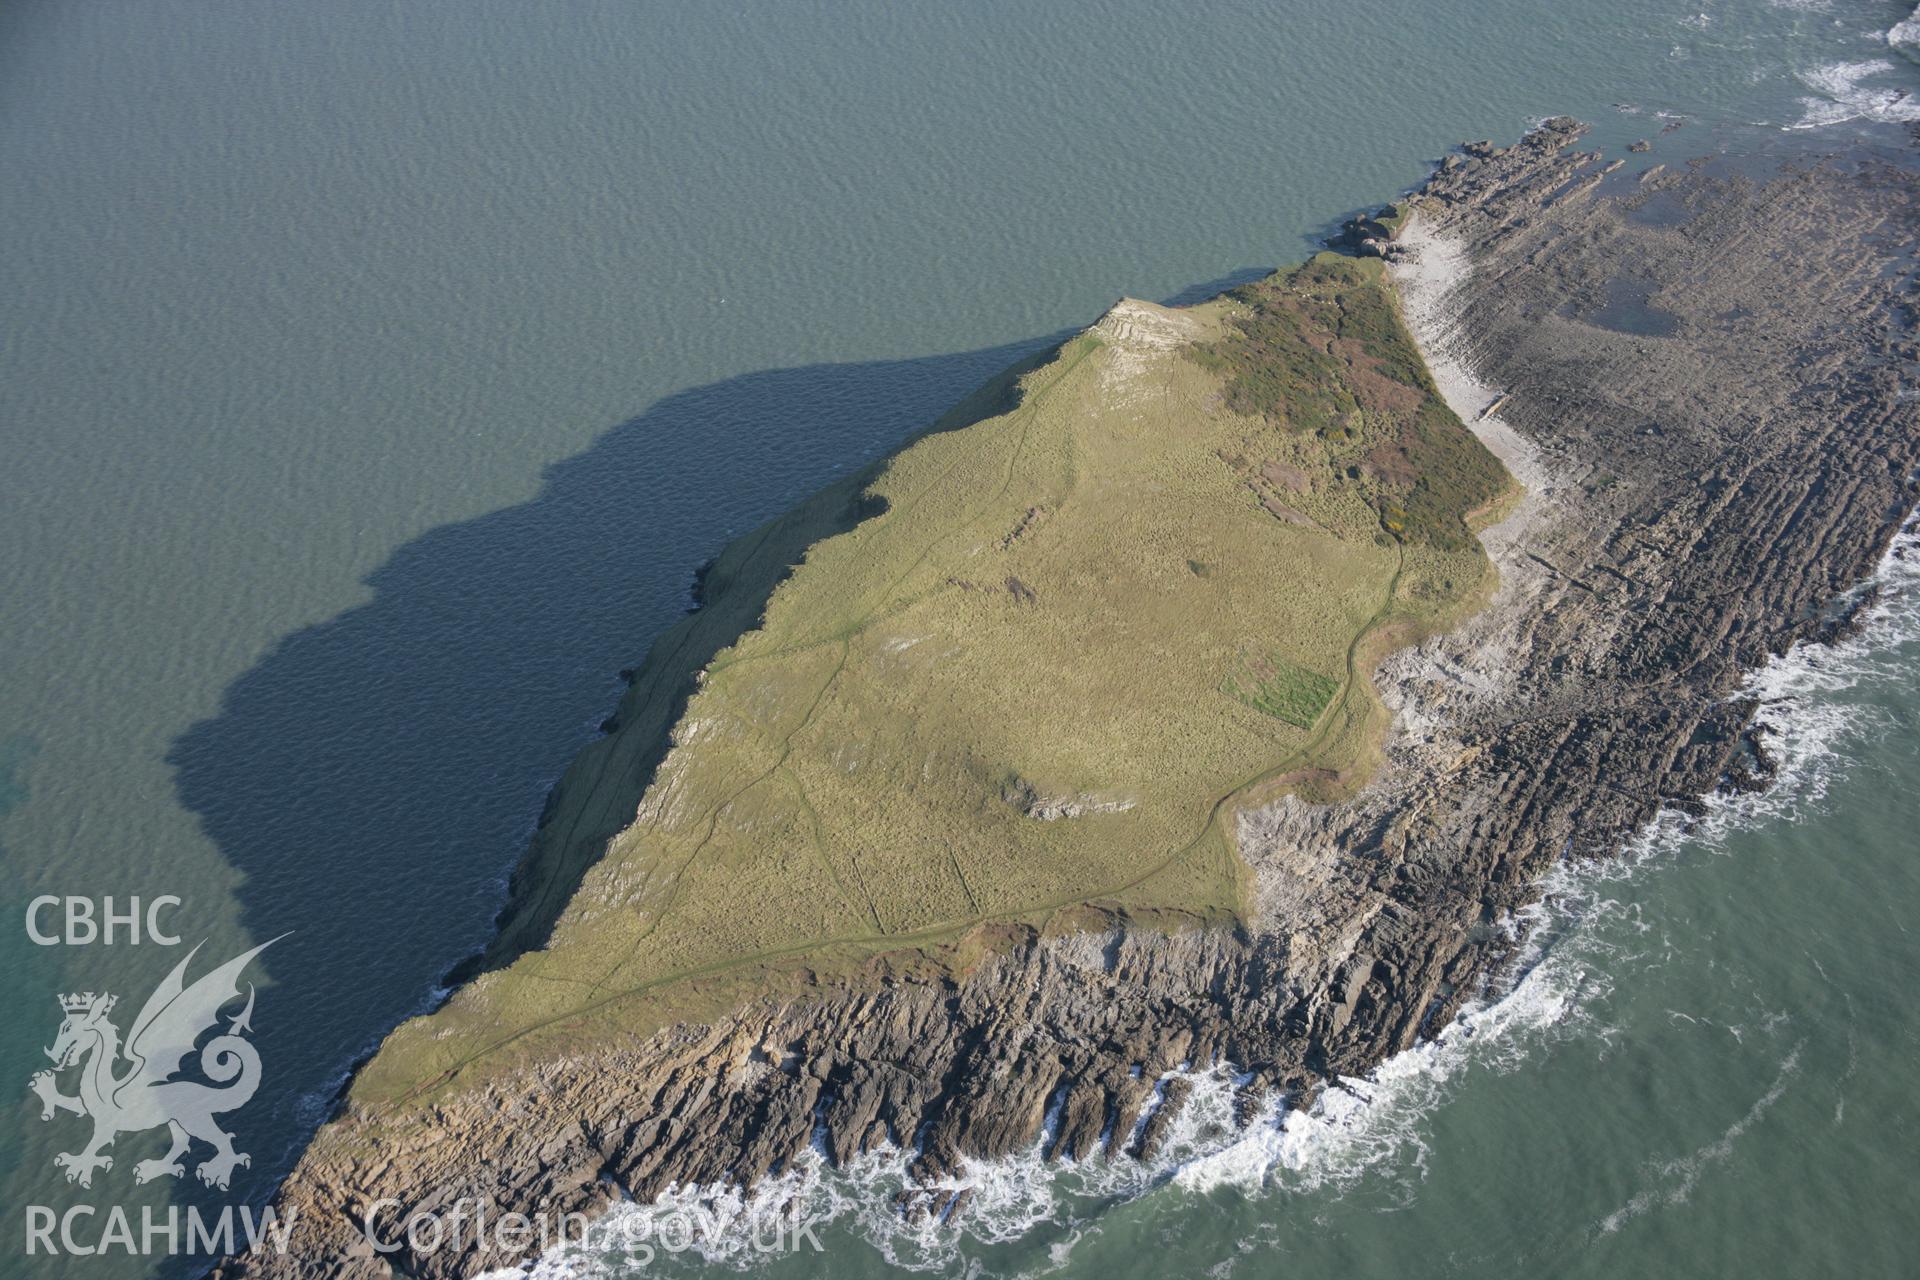 RCAHMW colour oblique aerial photograph of Worms Head Enclosure from the south-west. Taken on 26 January 2006 by Toby Driver.